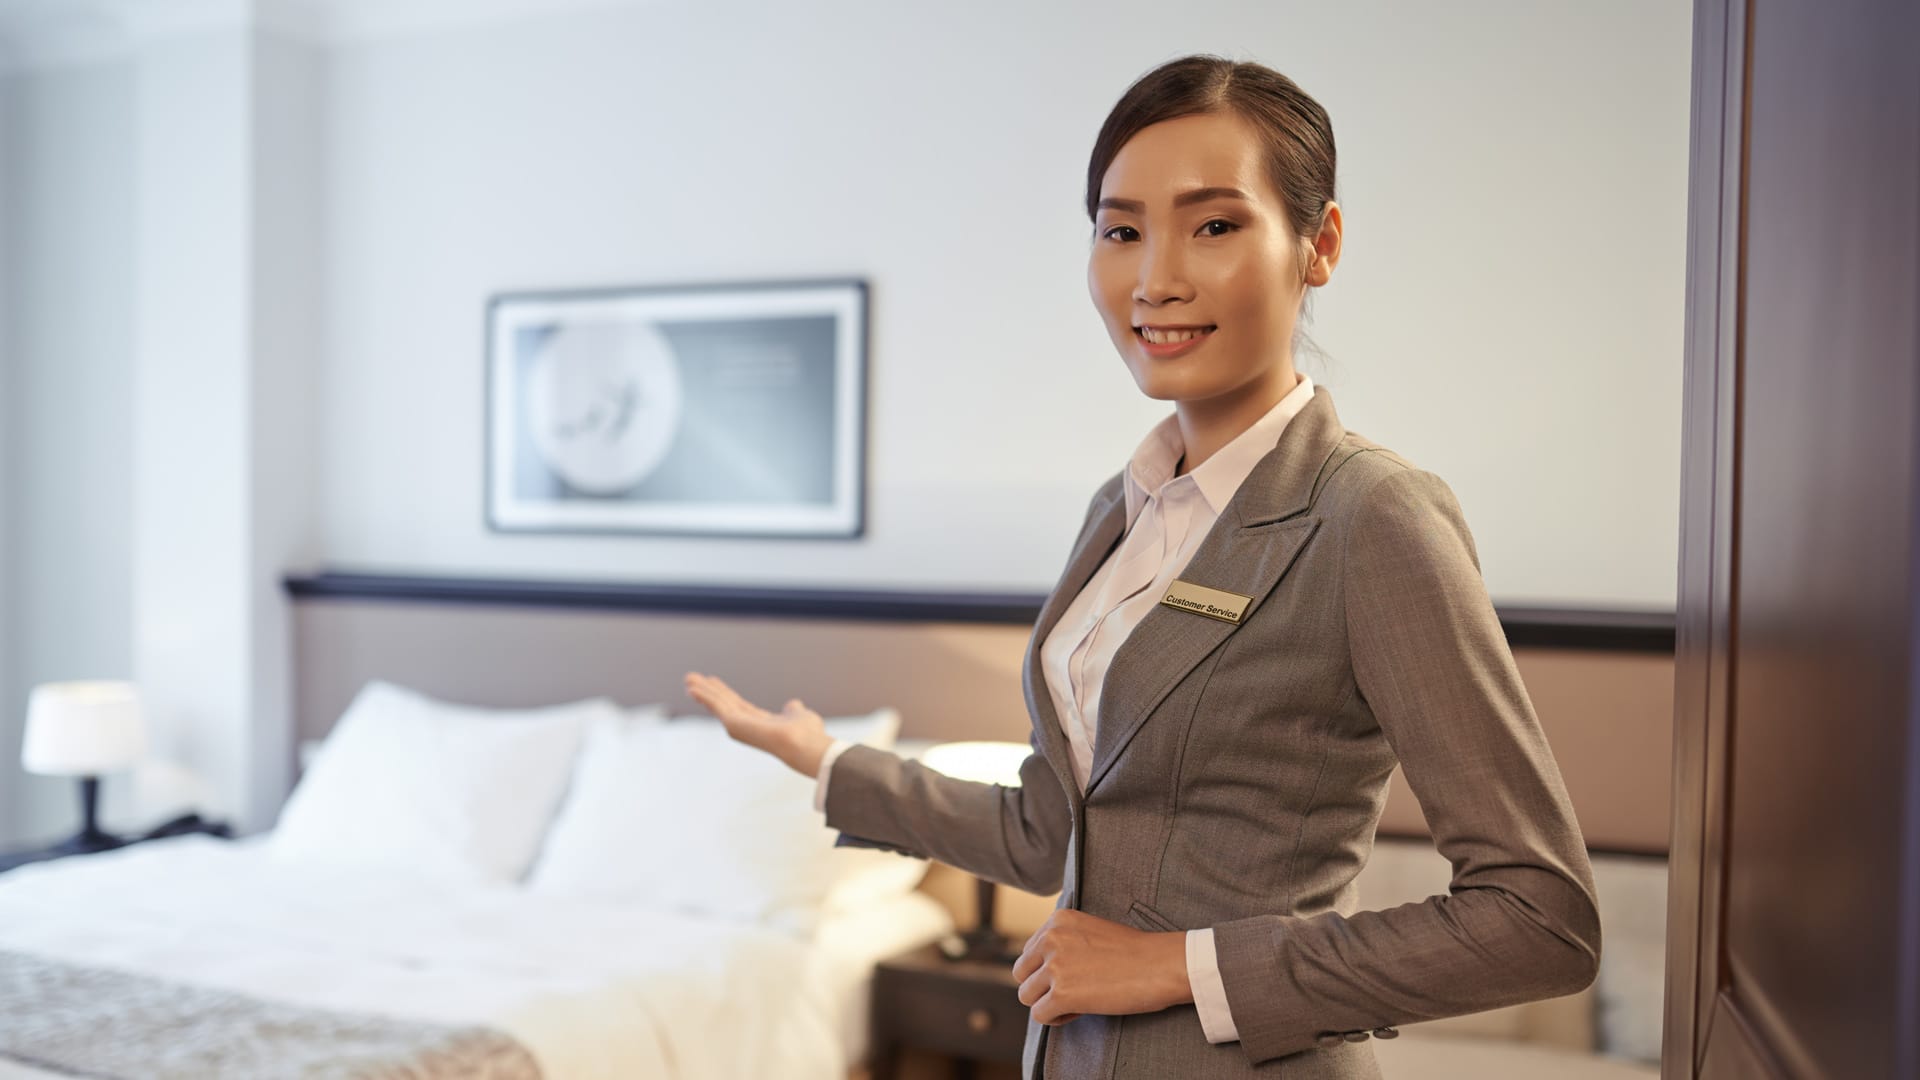 How to a Hotel Lodging Manager Career Girls